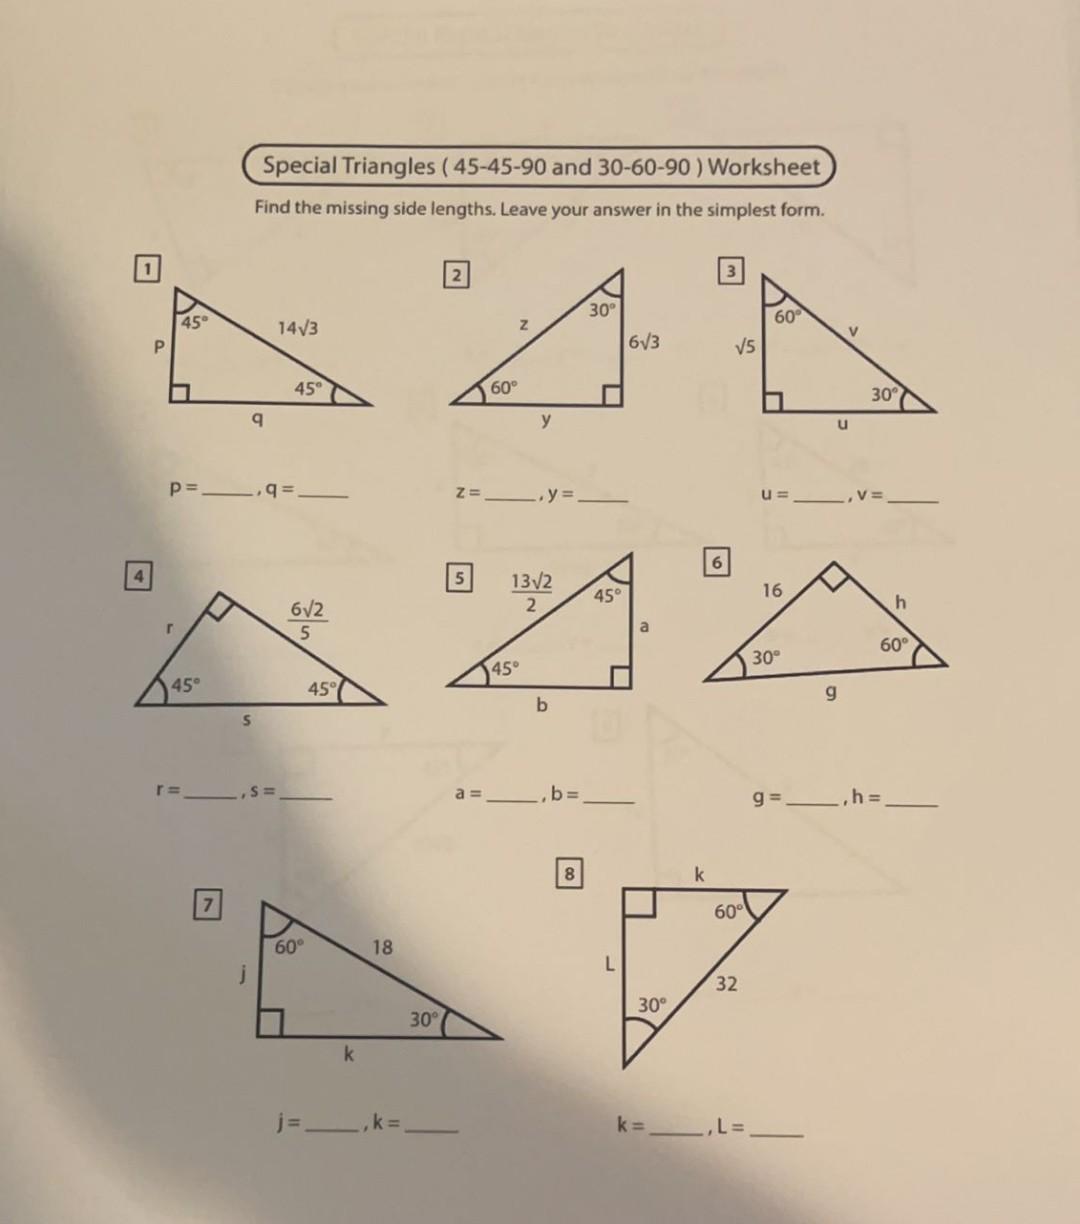 solved-special-triangles-45-45-90-and-30-60-90-worksheet-chegg